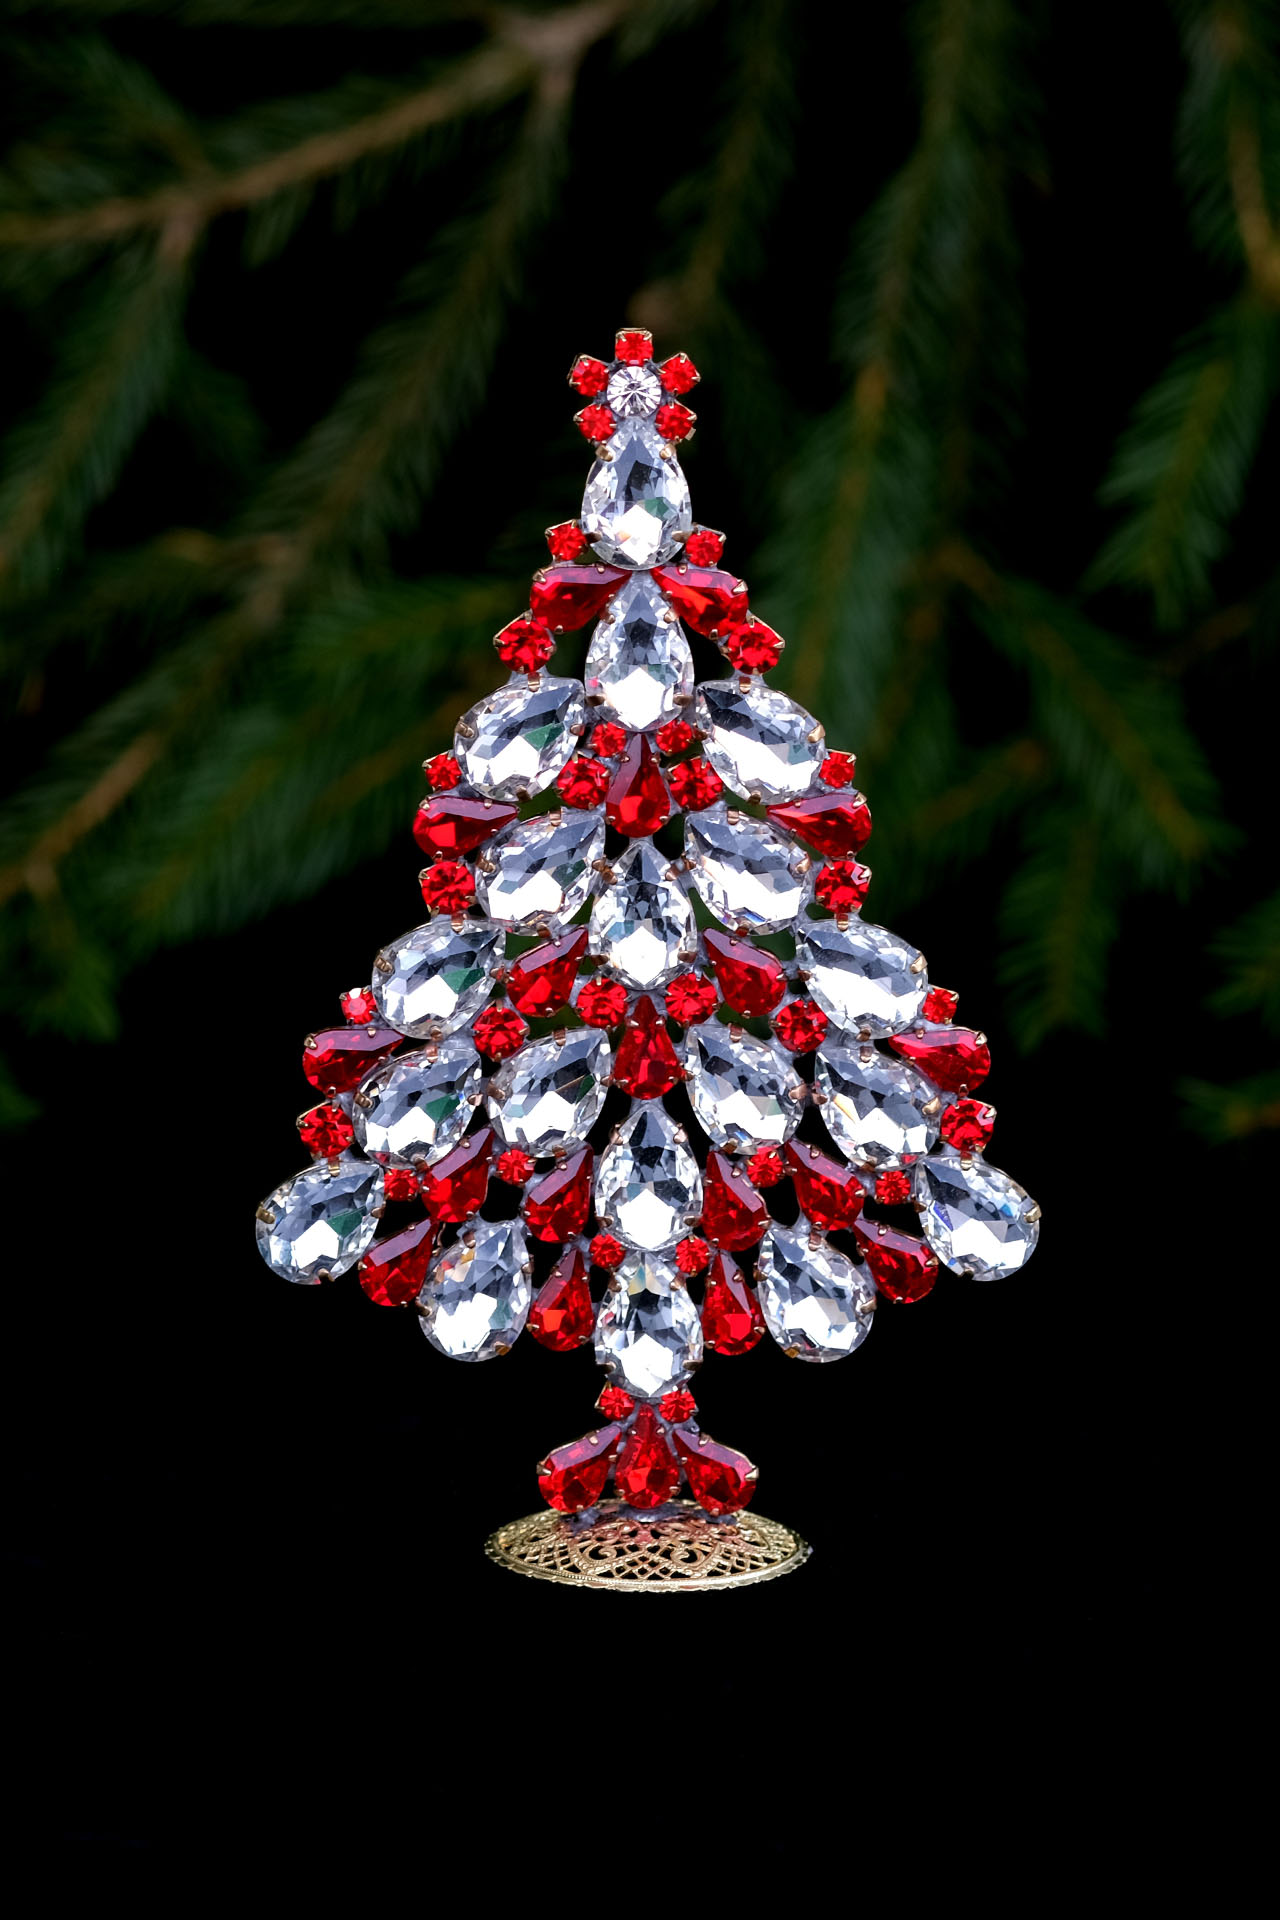 Delightful Xmas tree, handcrafted with red crystals